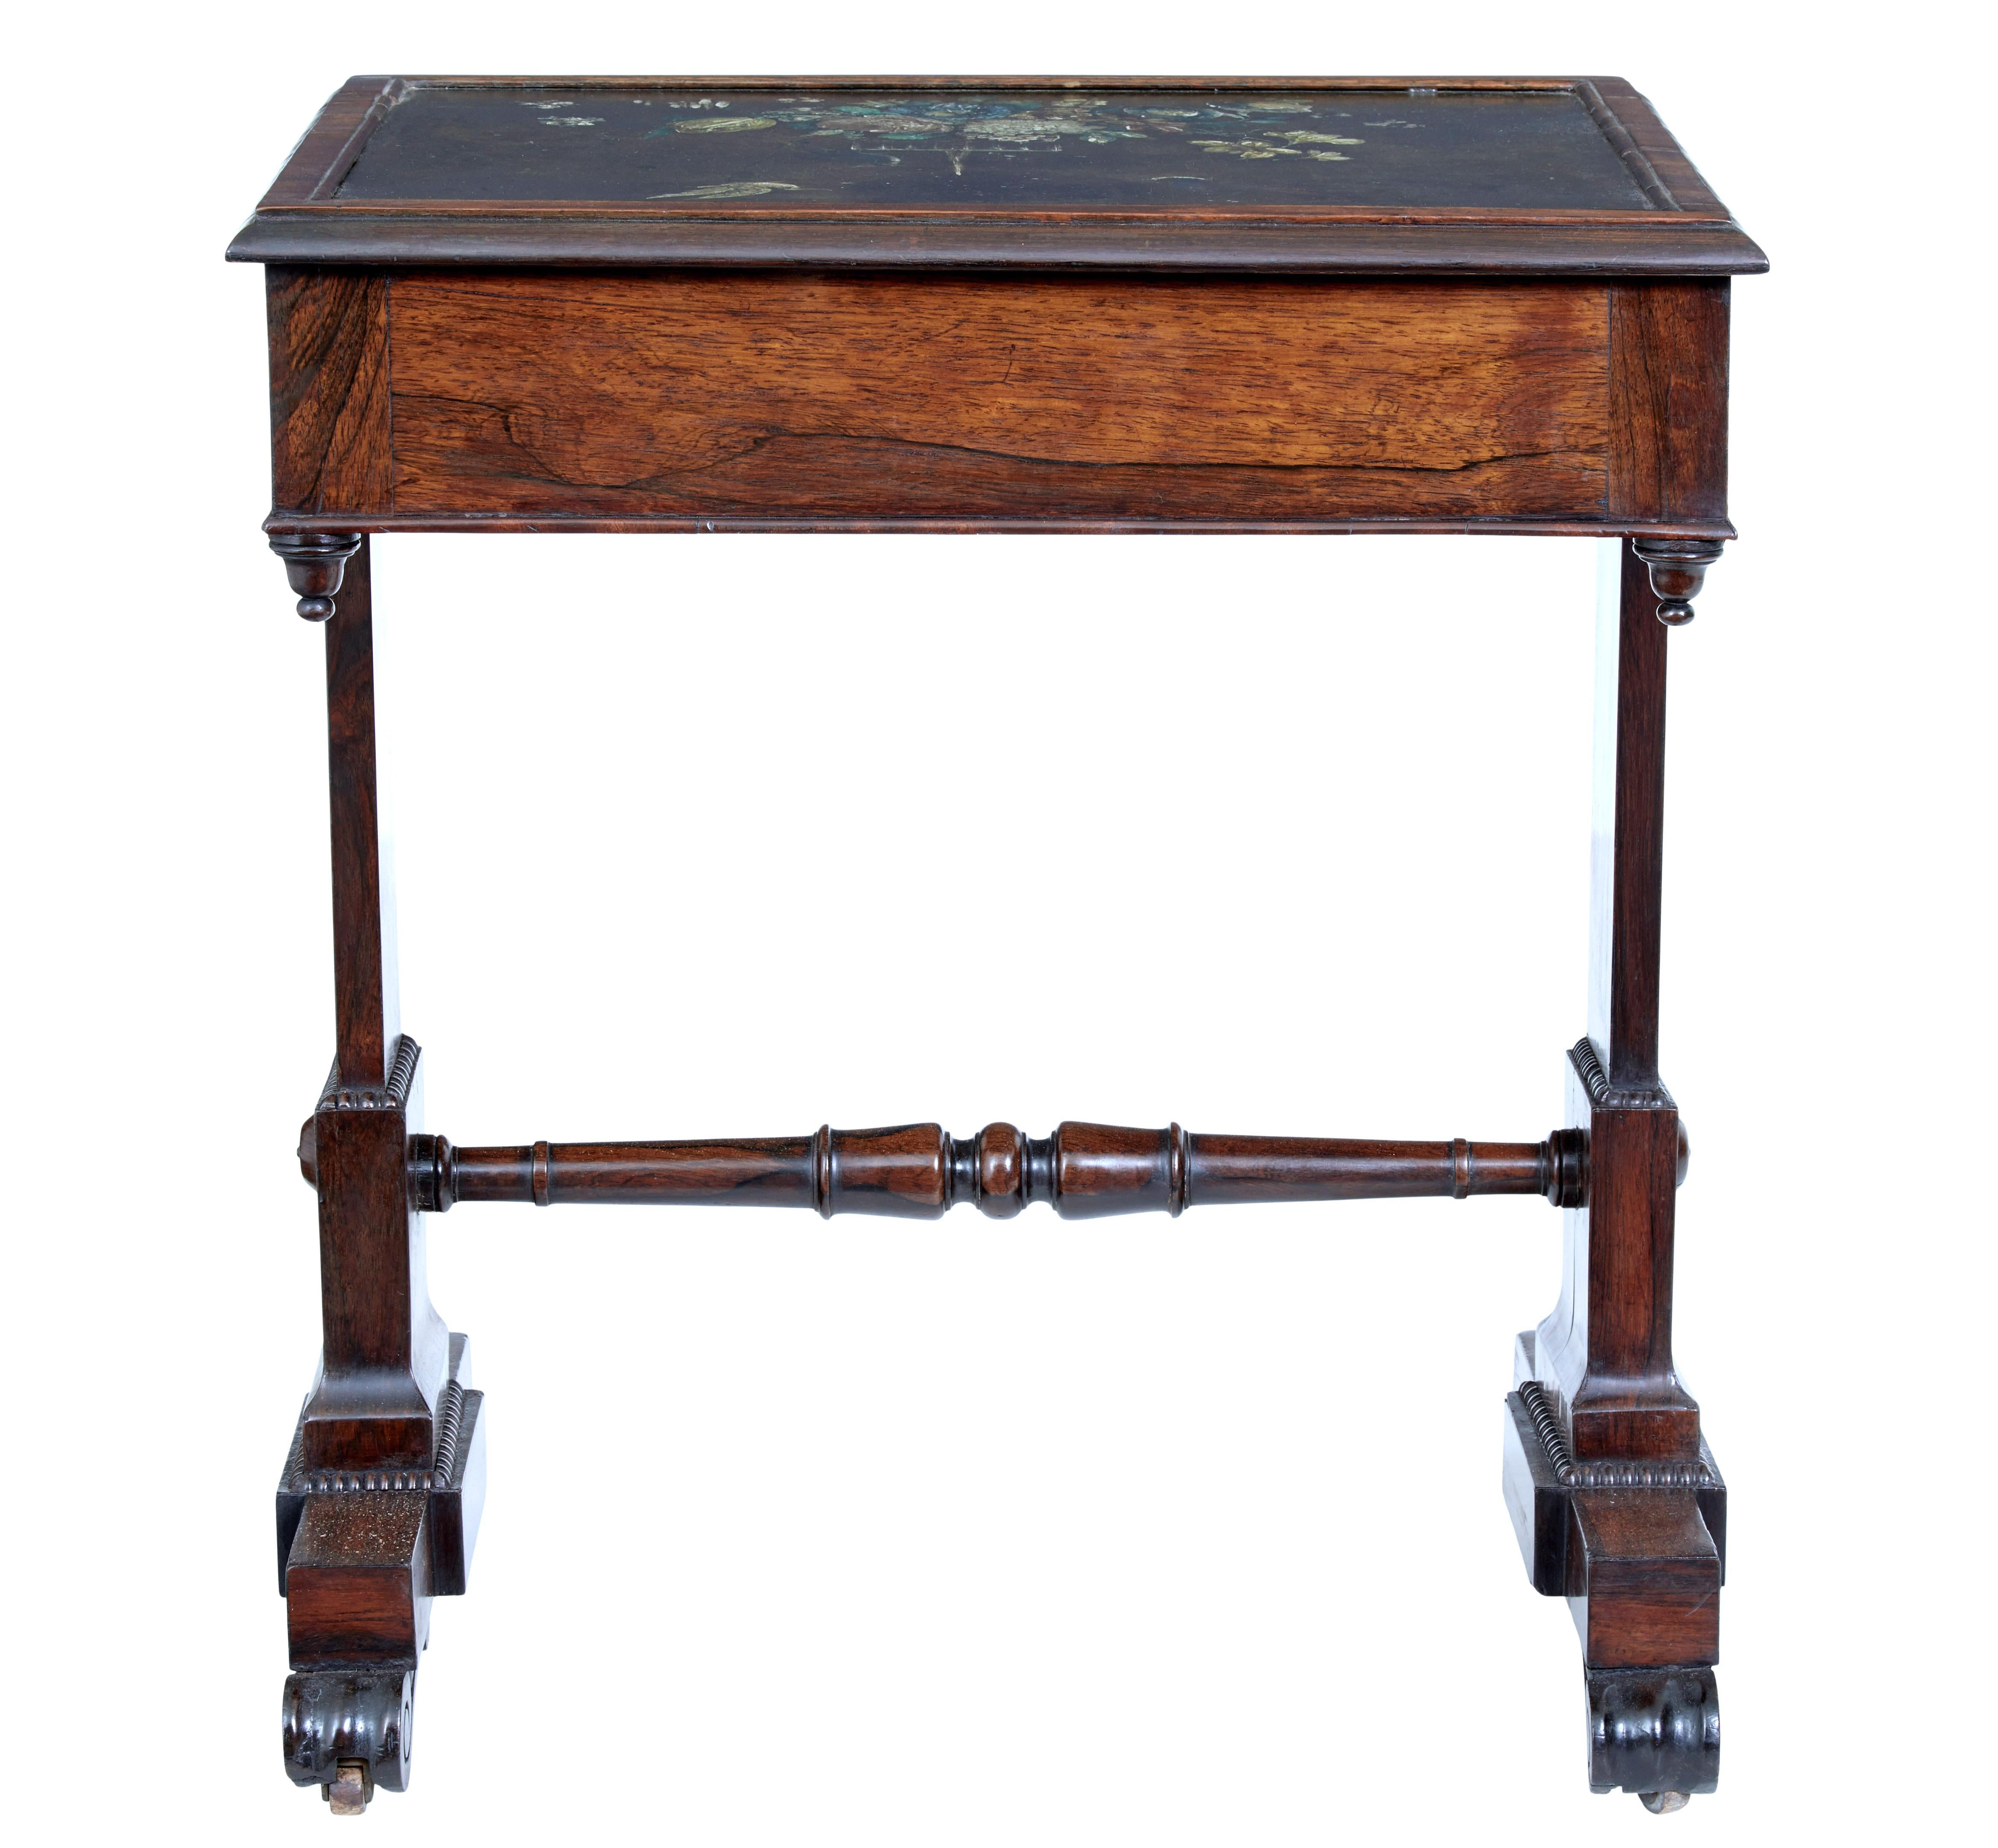 Early 19th Century Regency Palisander Painted Slate Top Side Table In Good Condition For Sale In Debenham, Suffolk